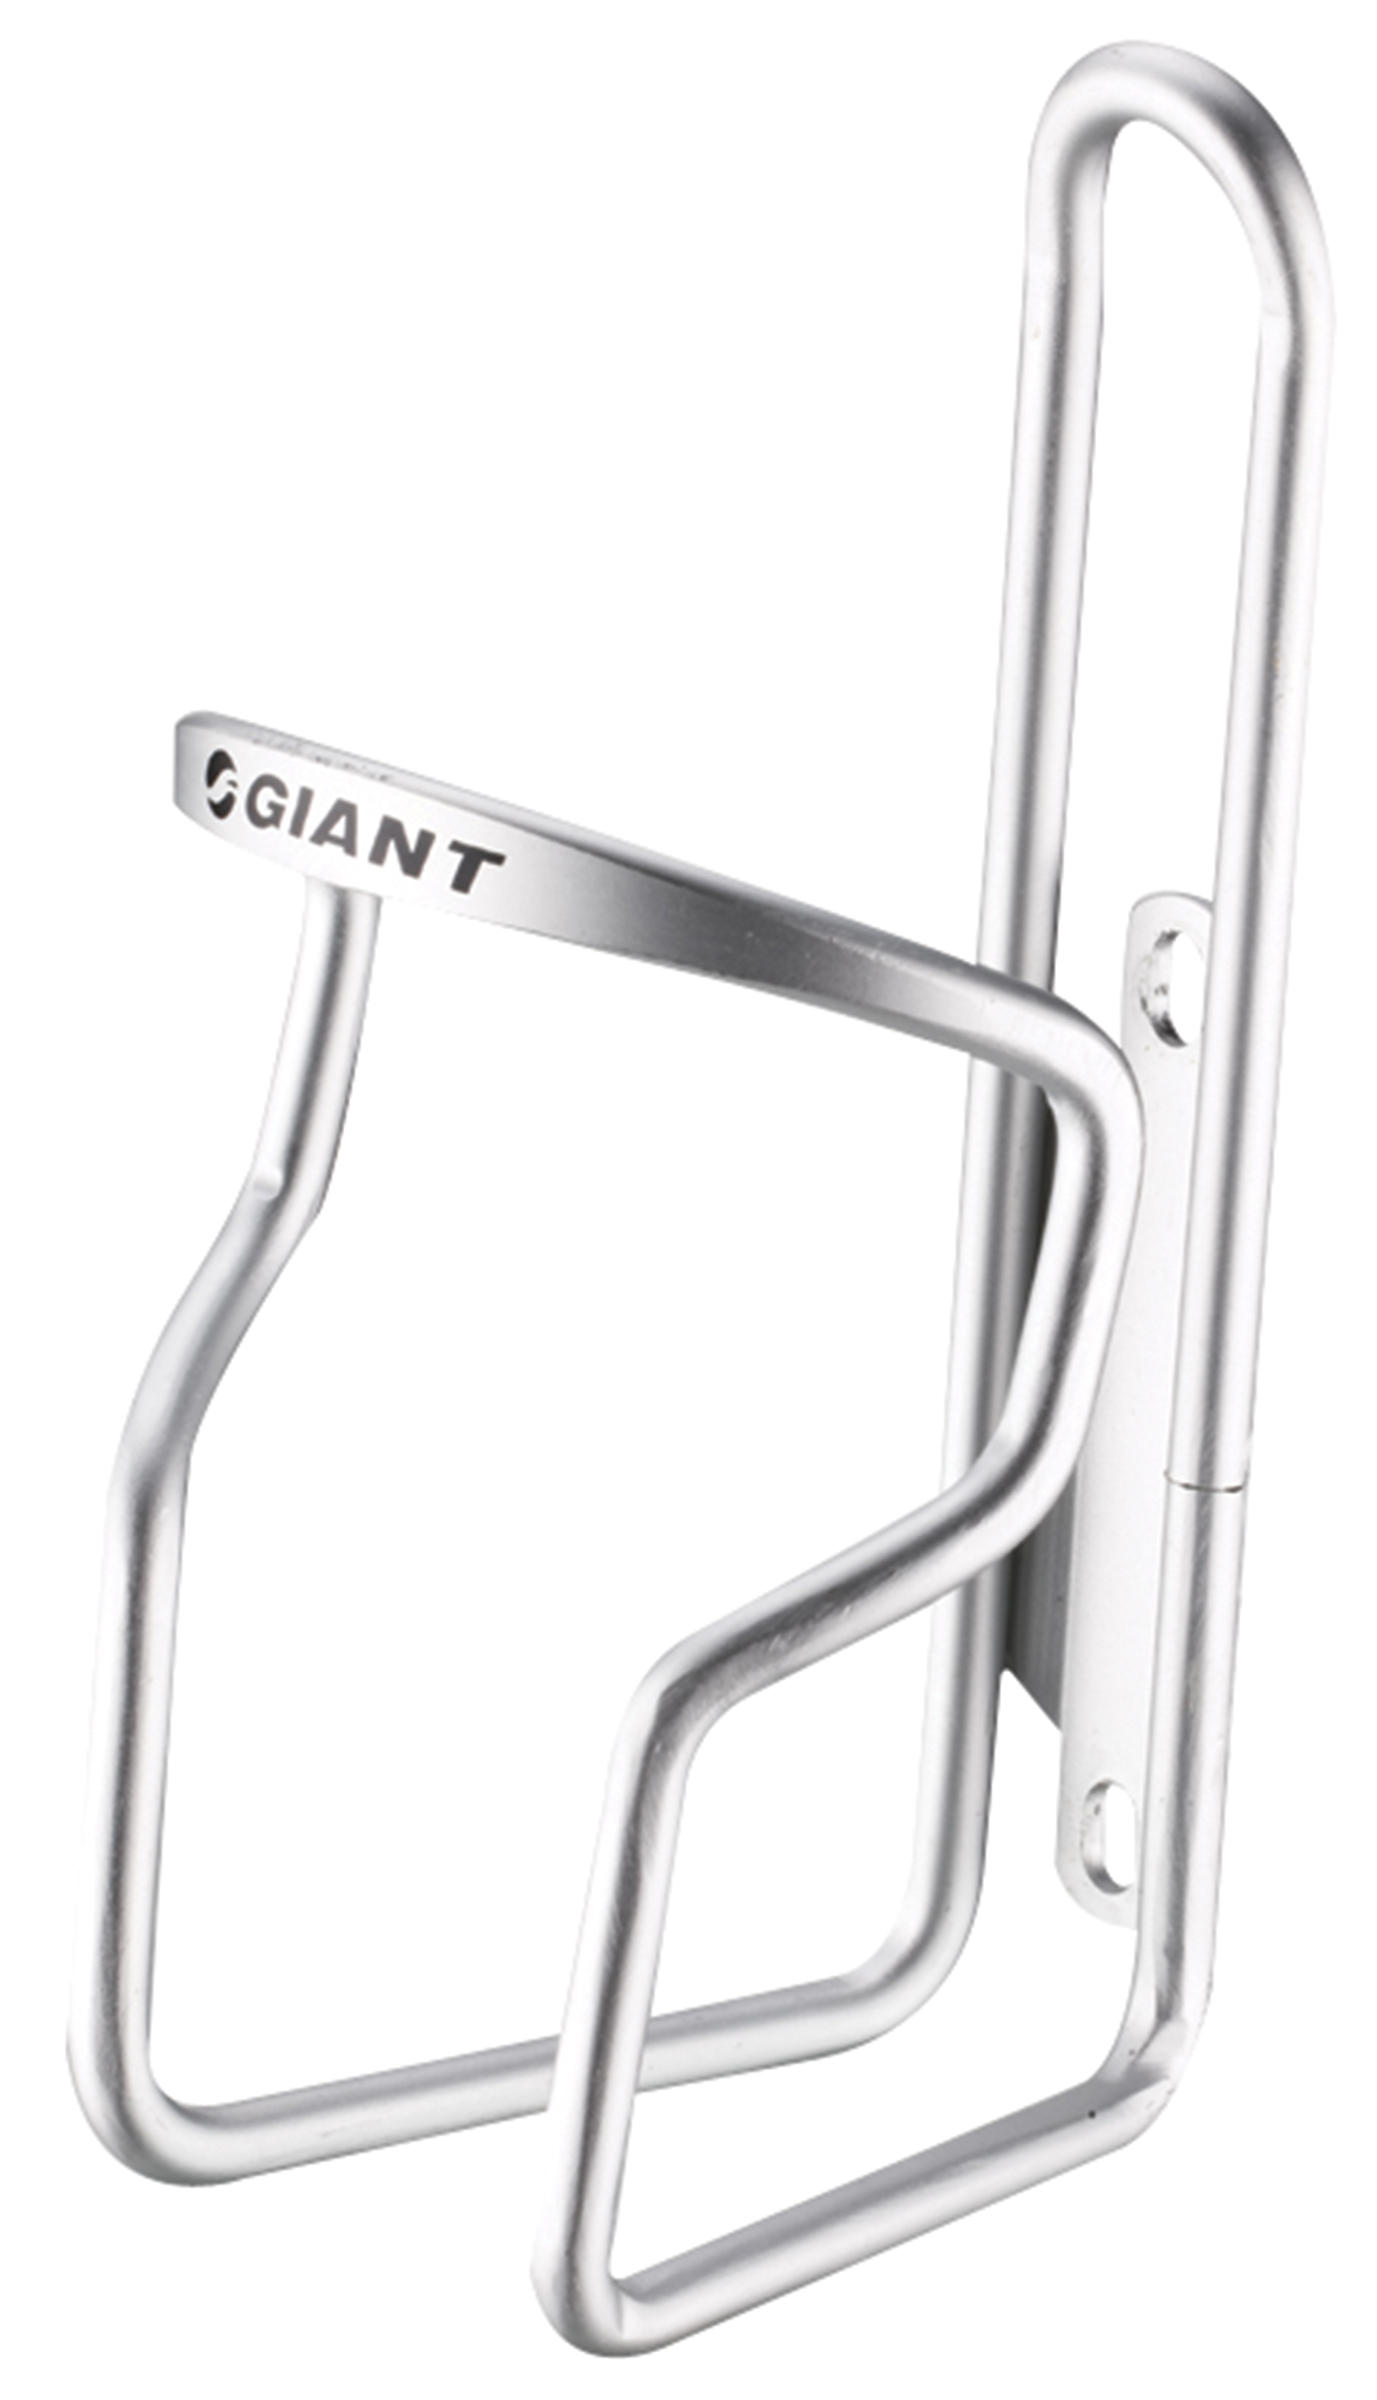 meester overhemd Het beste Giant Gateway 6mm Bottle Cage - Wheel World Bike Shops - Road Bikes,  Mountain Bikes, Bicycle Parts and Accessories. Parts & Bike Closeouts!